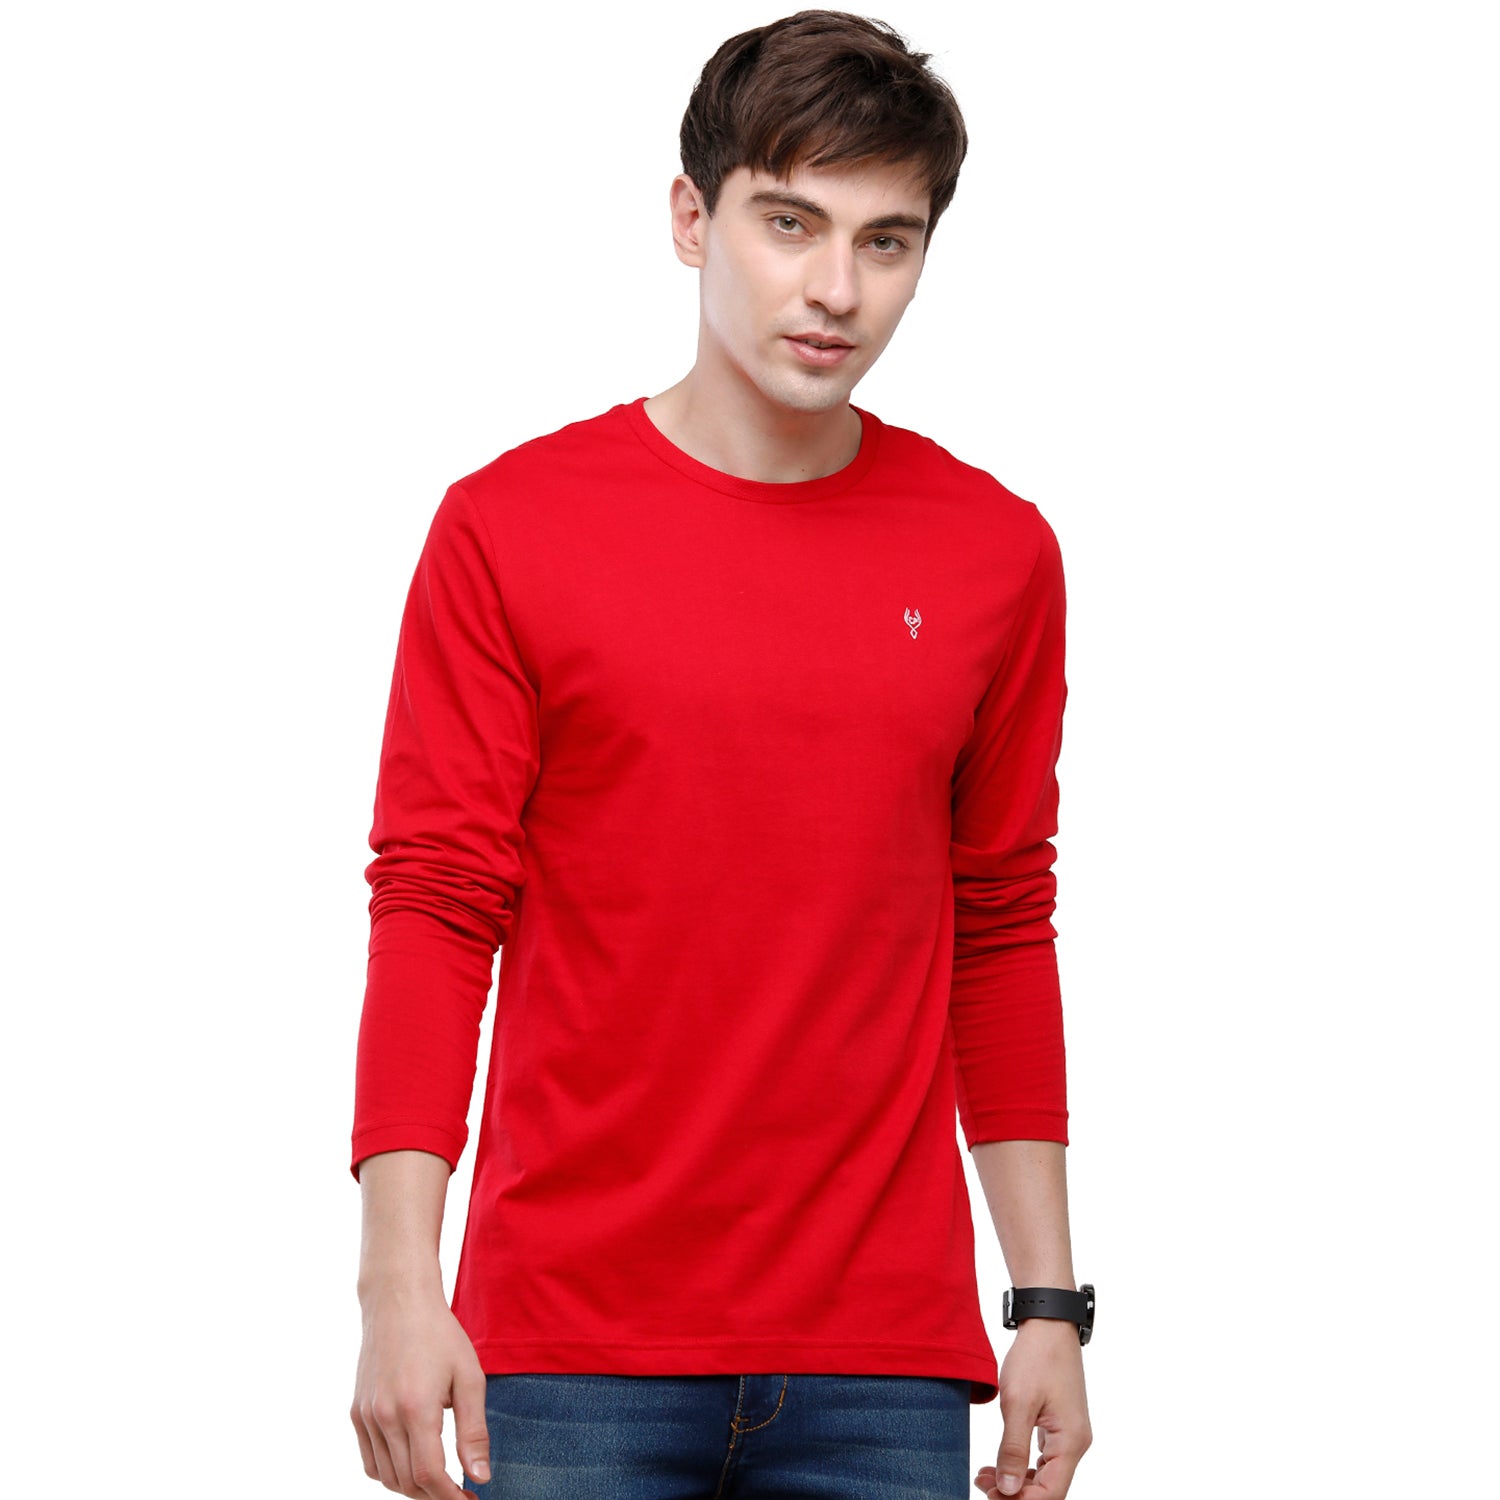 Classic polo Men's Red Single Jersey Crew Neck Full Sleeve Slim Fit T-Shirt - Comet 02 T-shirt Classic Polo 